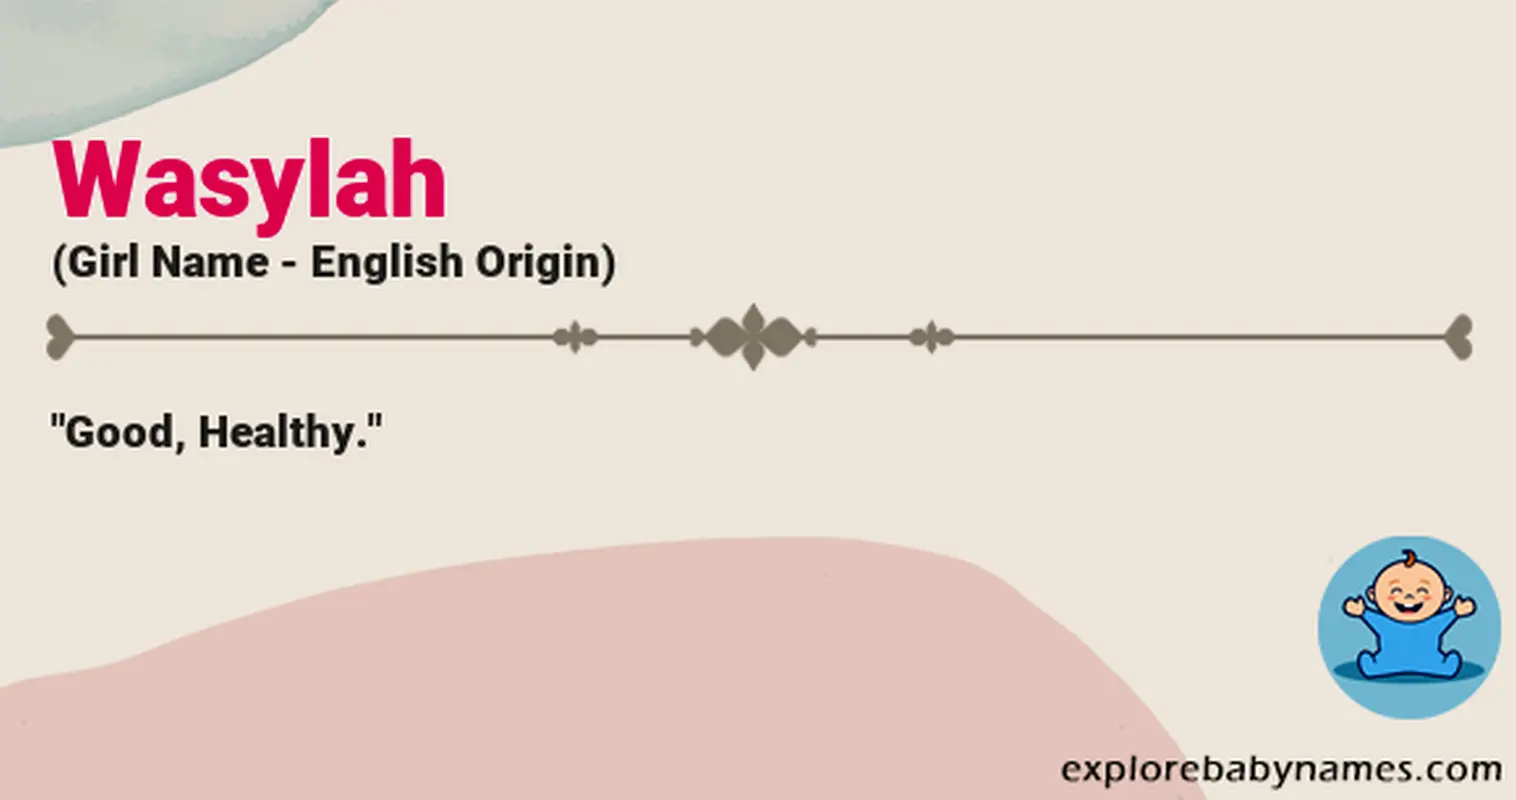 Meaning of Wasylah